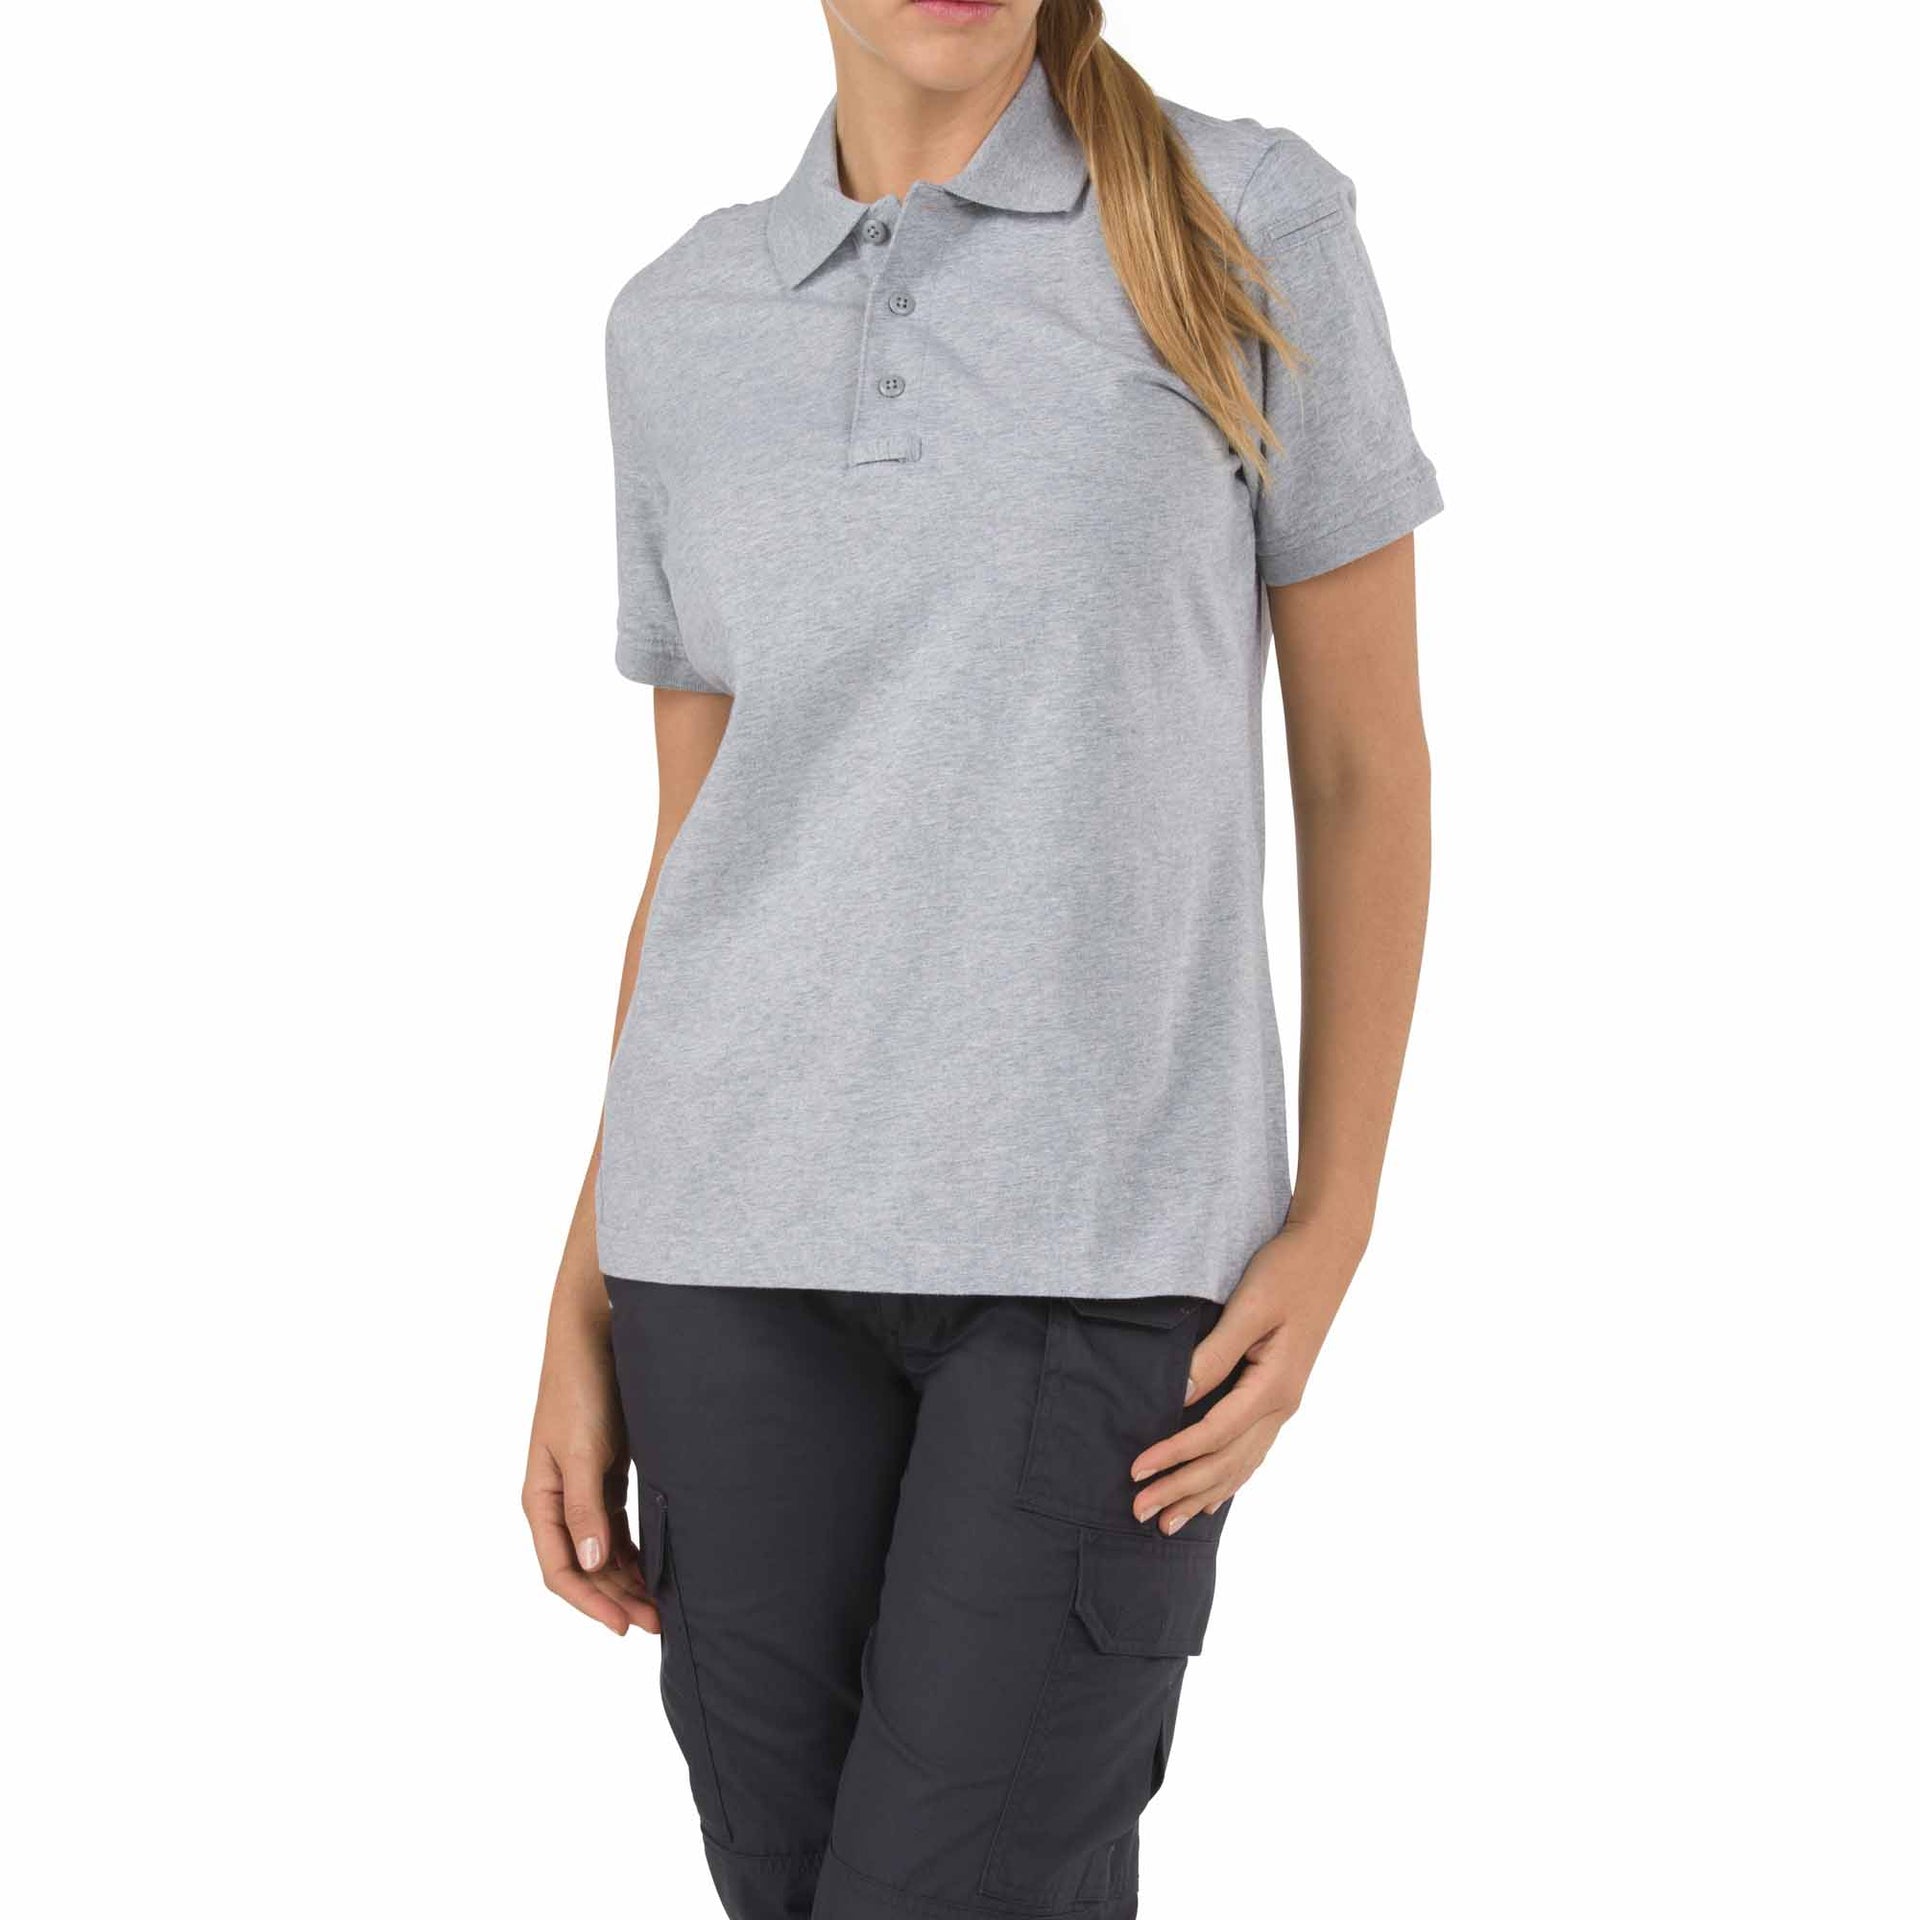 5.11 Tactical Women’s Tactical Jersey Short Sleeve Polo (61164) | The Fire Center | Fuego Fire Center | Firefighter Gear | An ideal, popular choice for casual uniform wear, 5.11®'s Women's Tactical Jersey Polo is designed to meet dress code and functional requirements for officers and first responders.